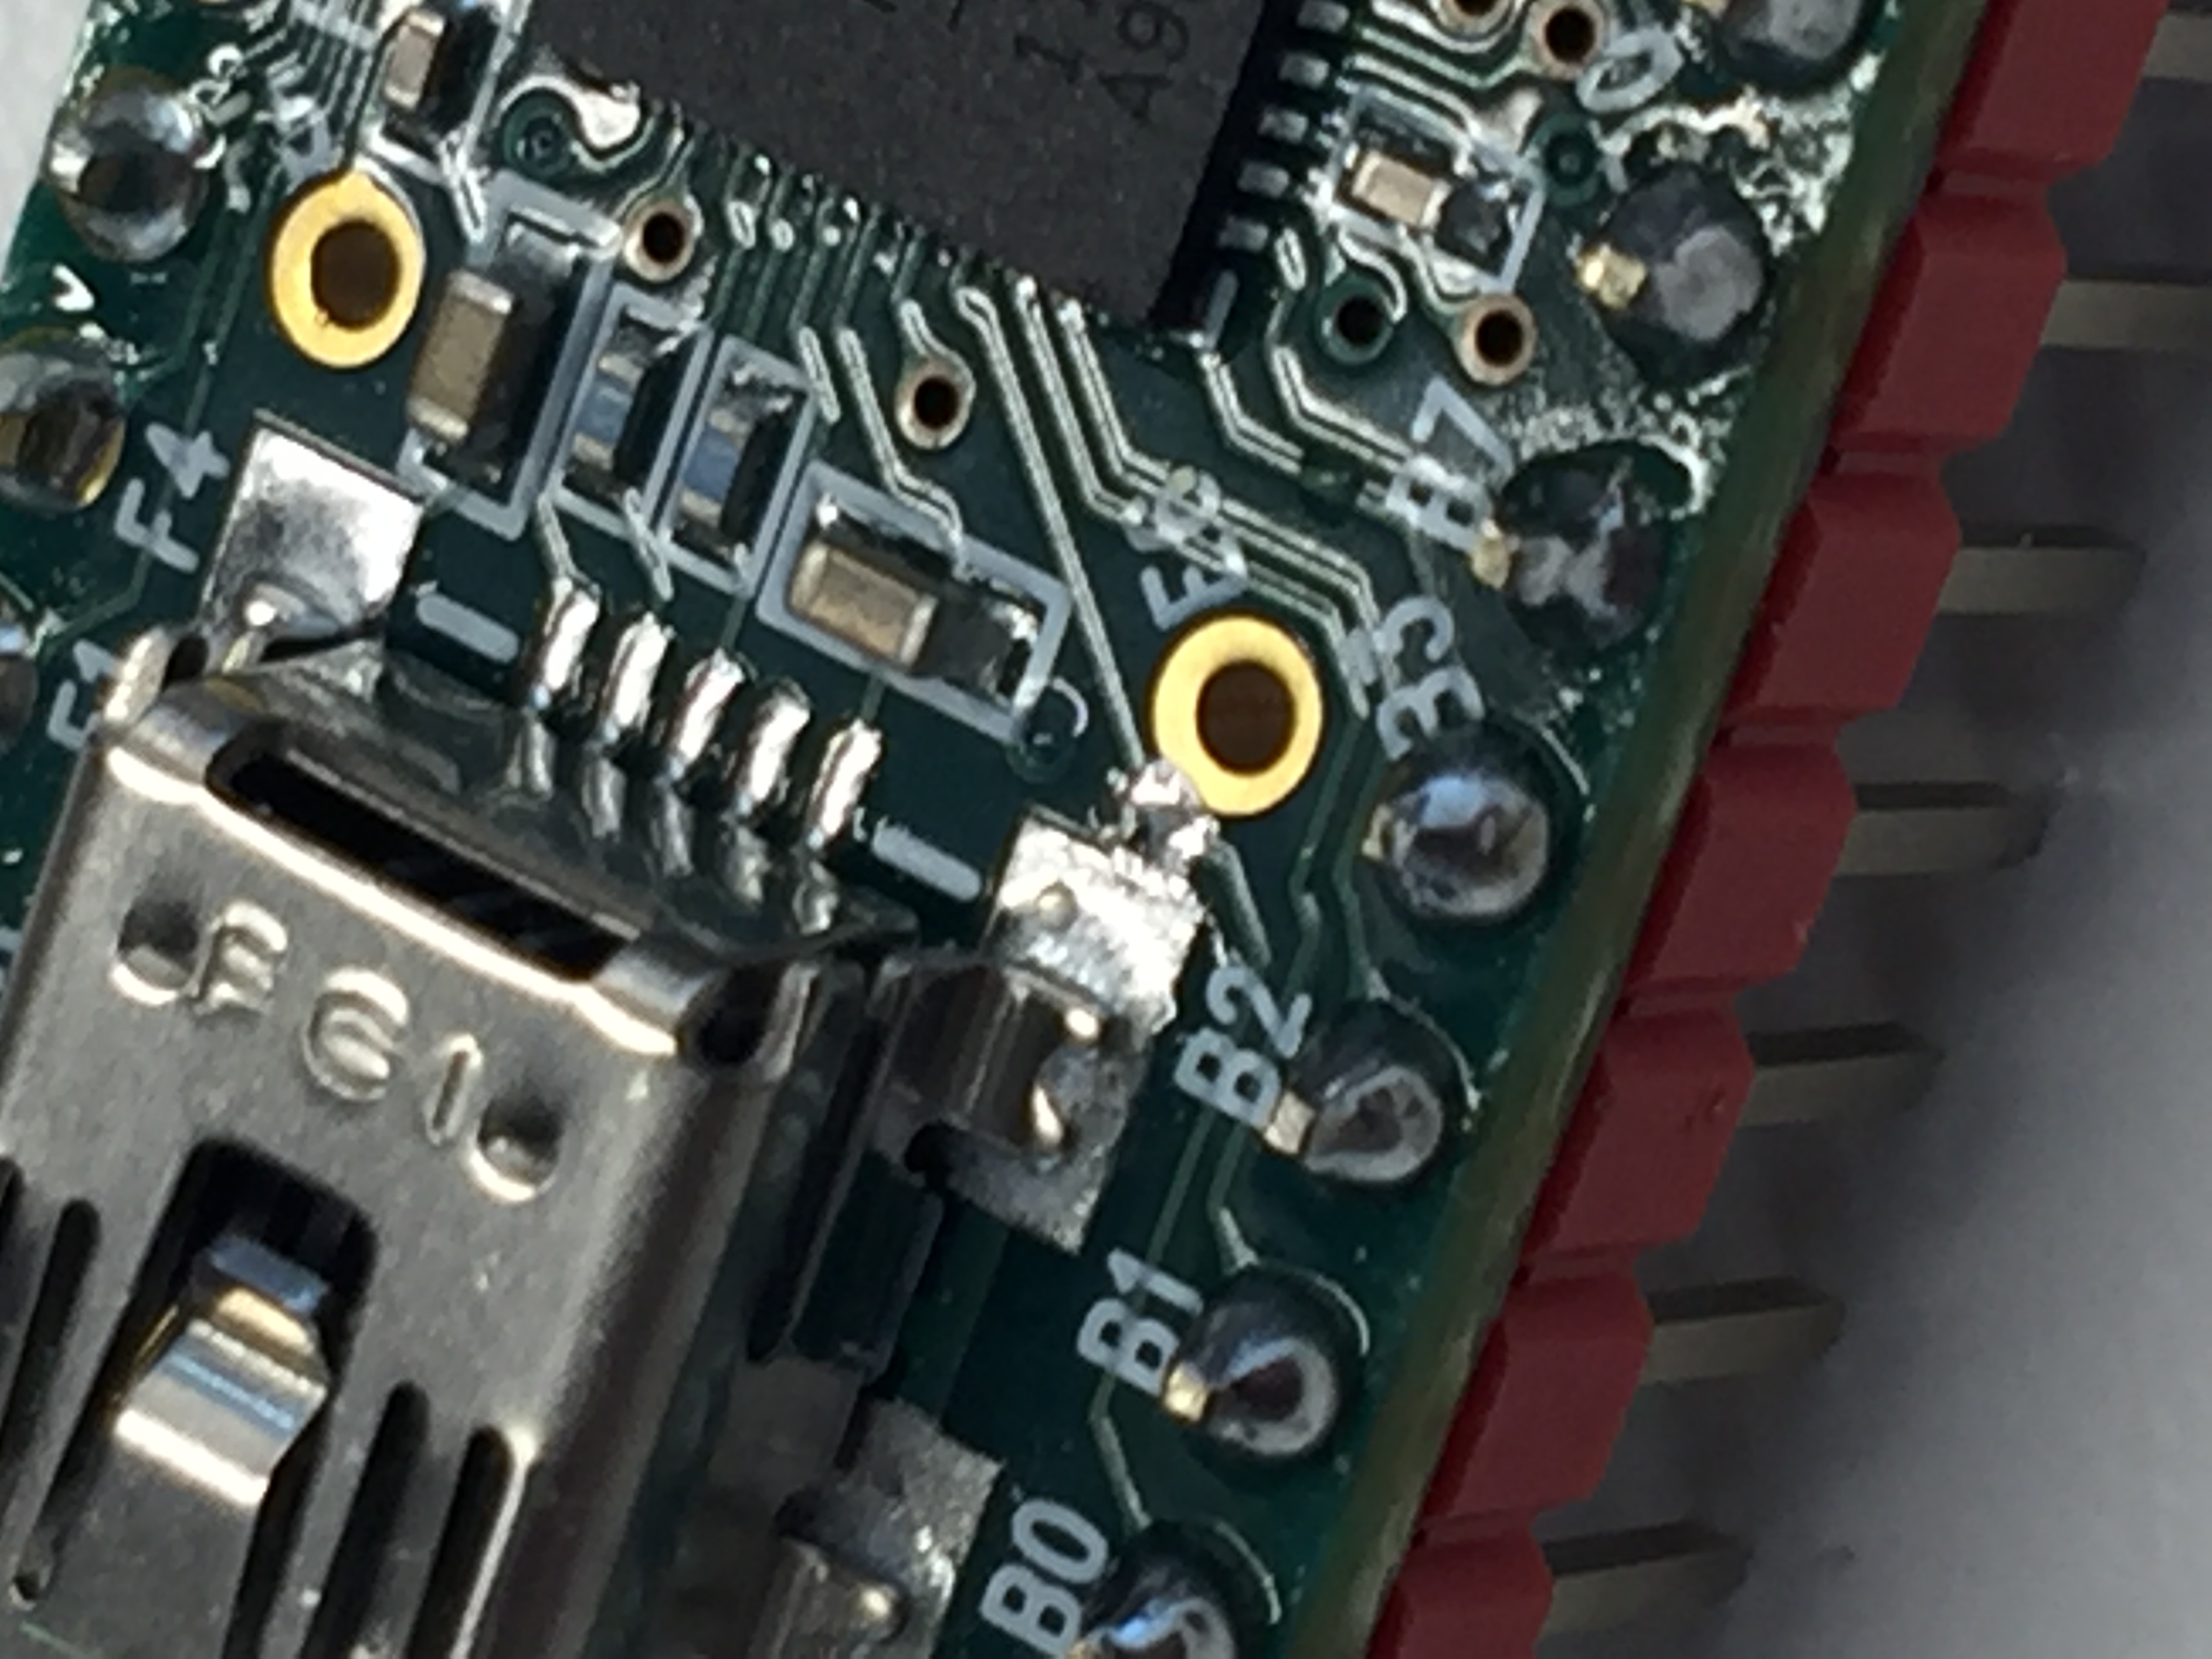 A tiny drop of solder on the Teensy. This is because of my very bad skills with soldering.